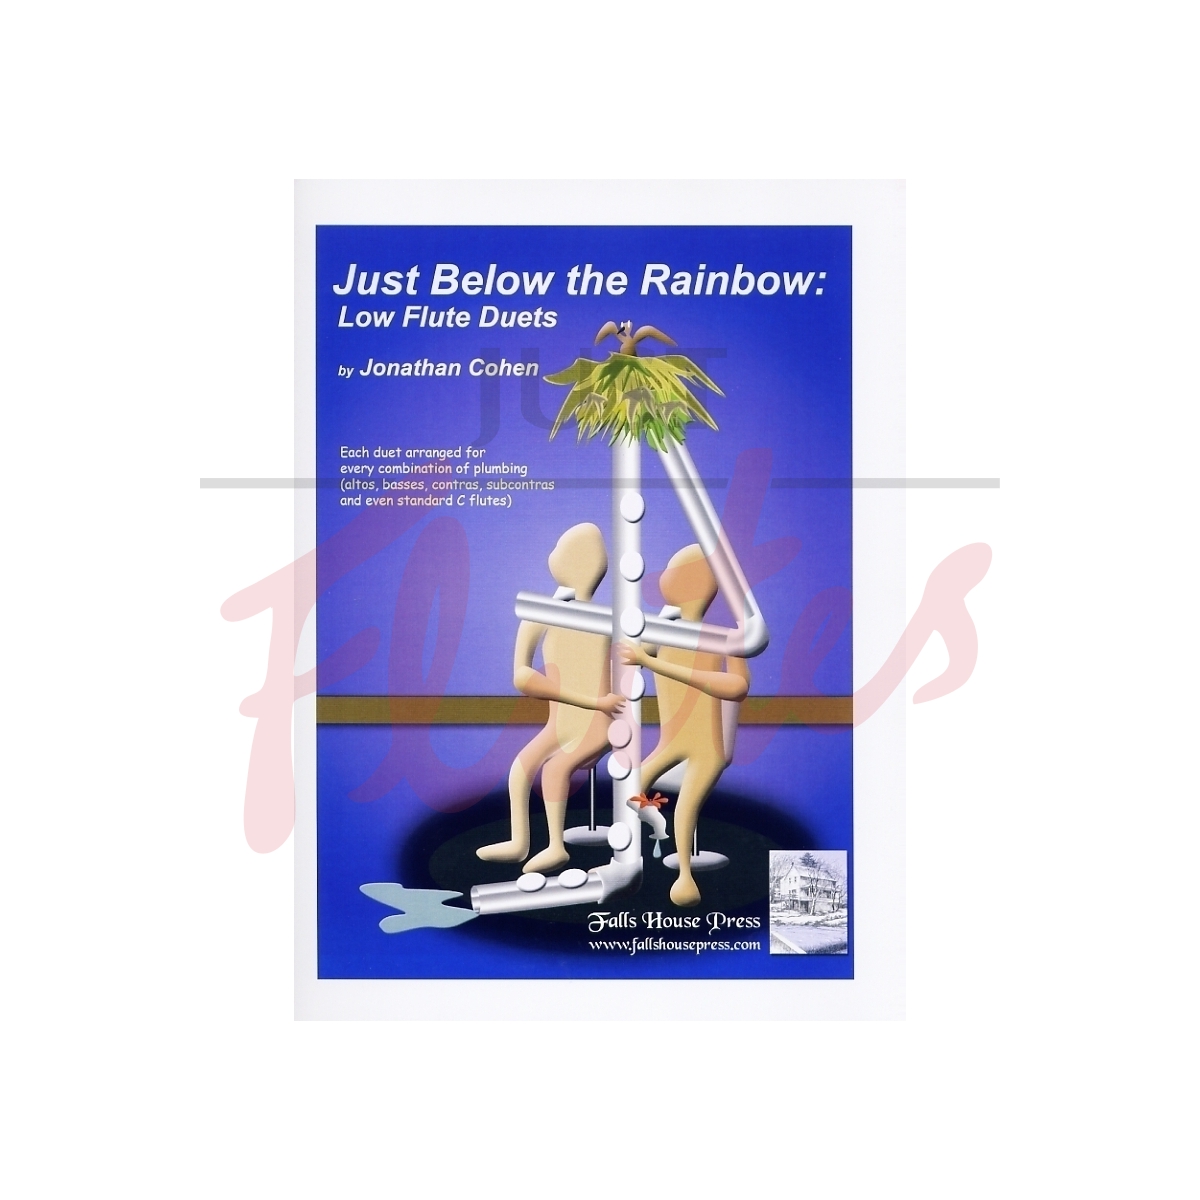 Just Below the Rainbow: Low Flute Duets